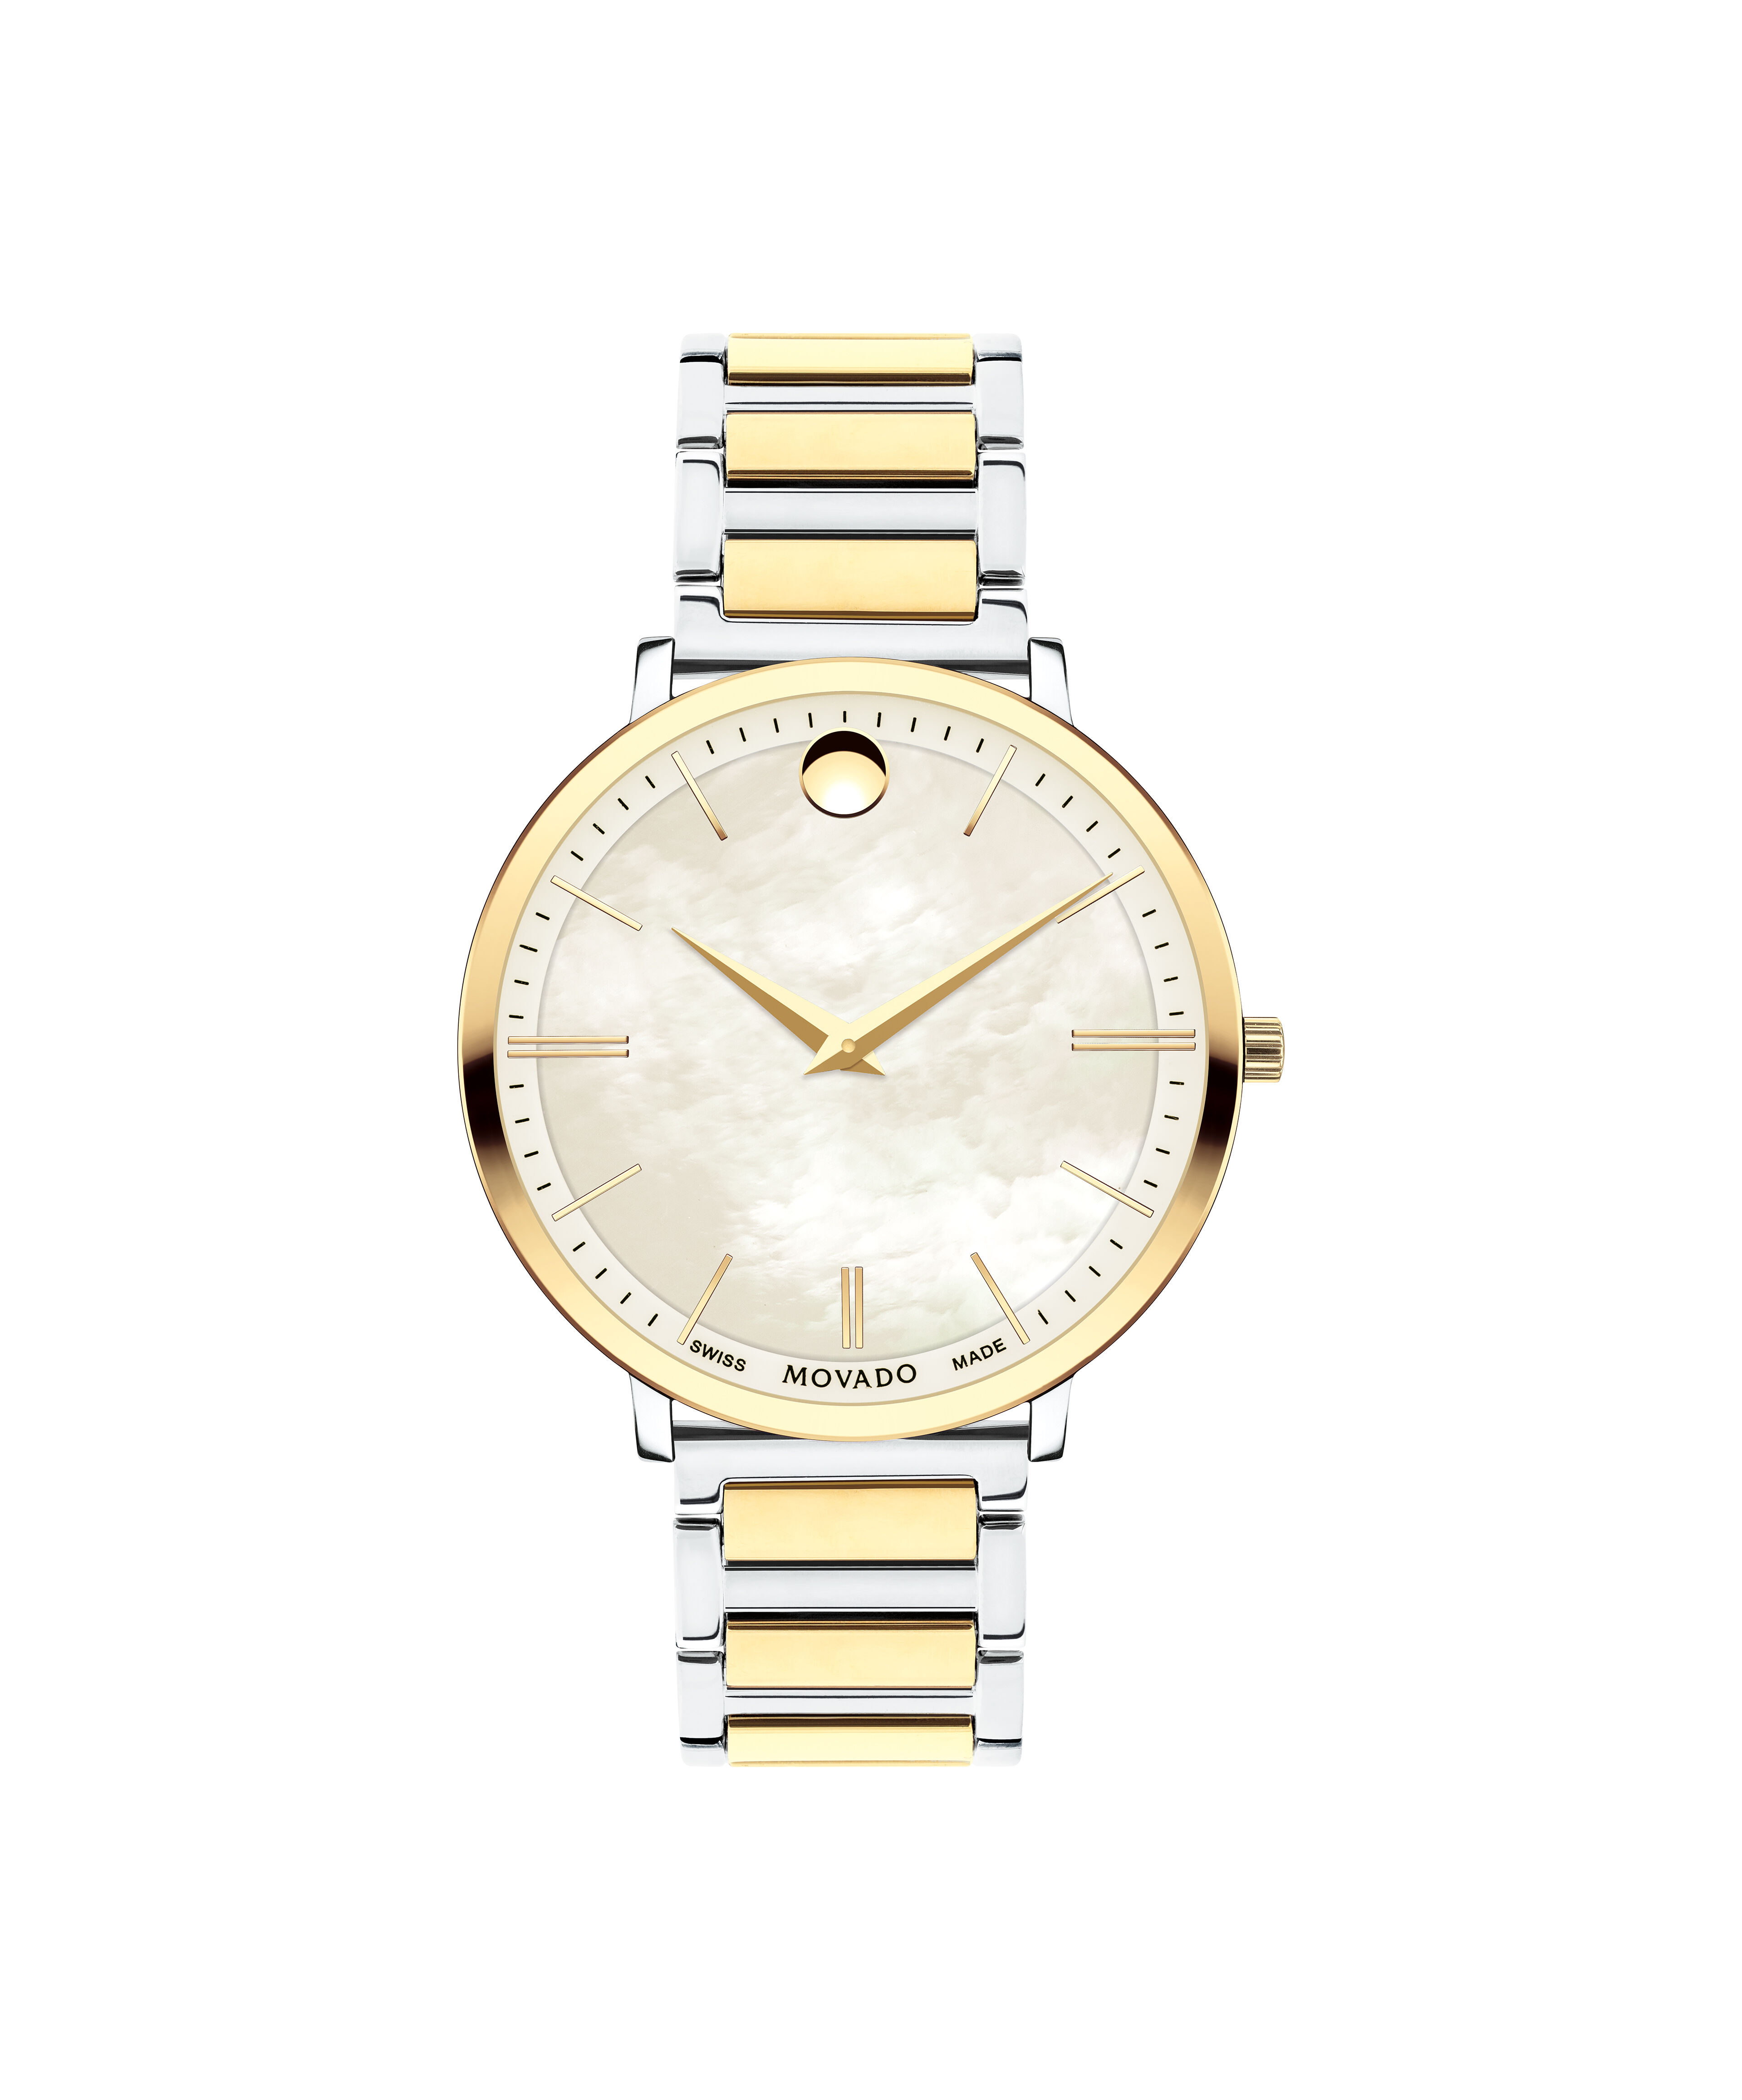 Women's Omega Constellation Watch Real Vs Fake